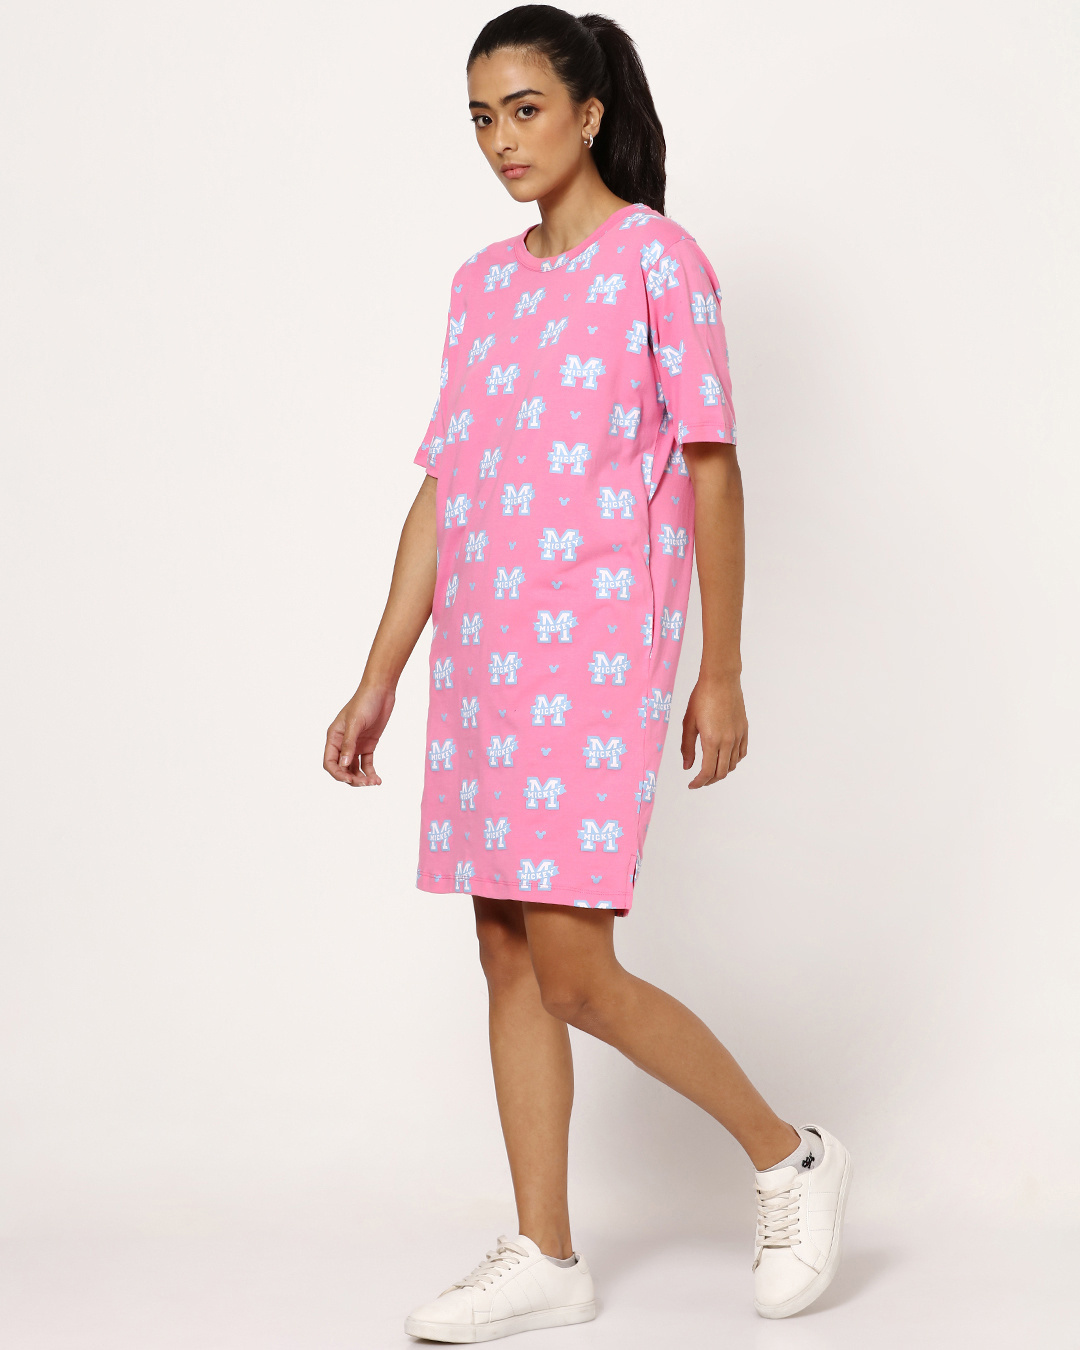 Shop Women's All Over Printed Pink Oversized Dress-Back